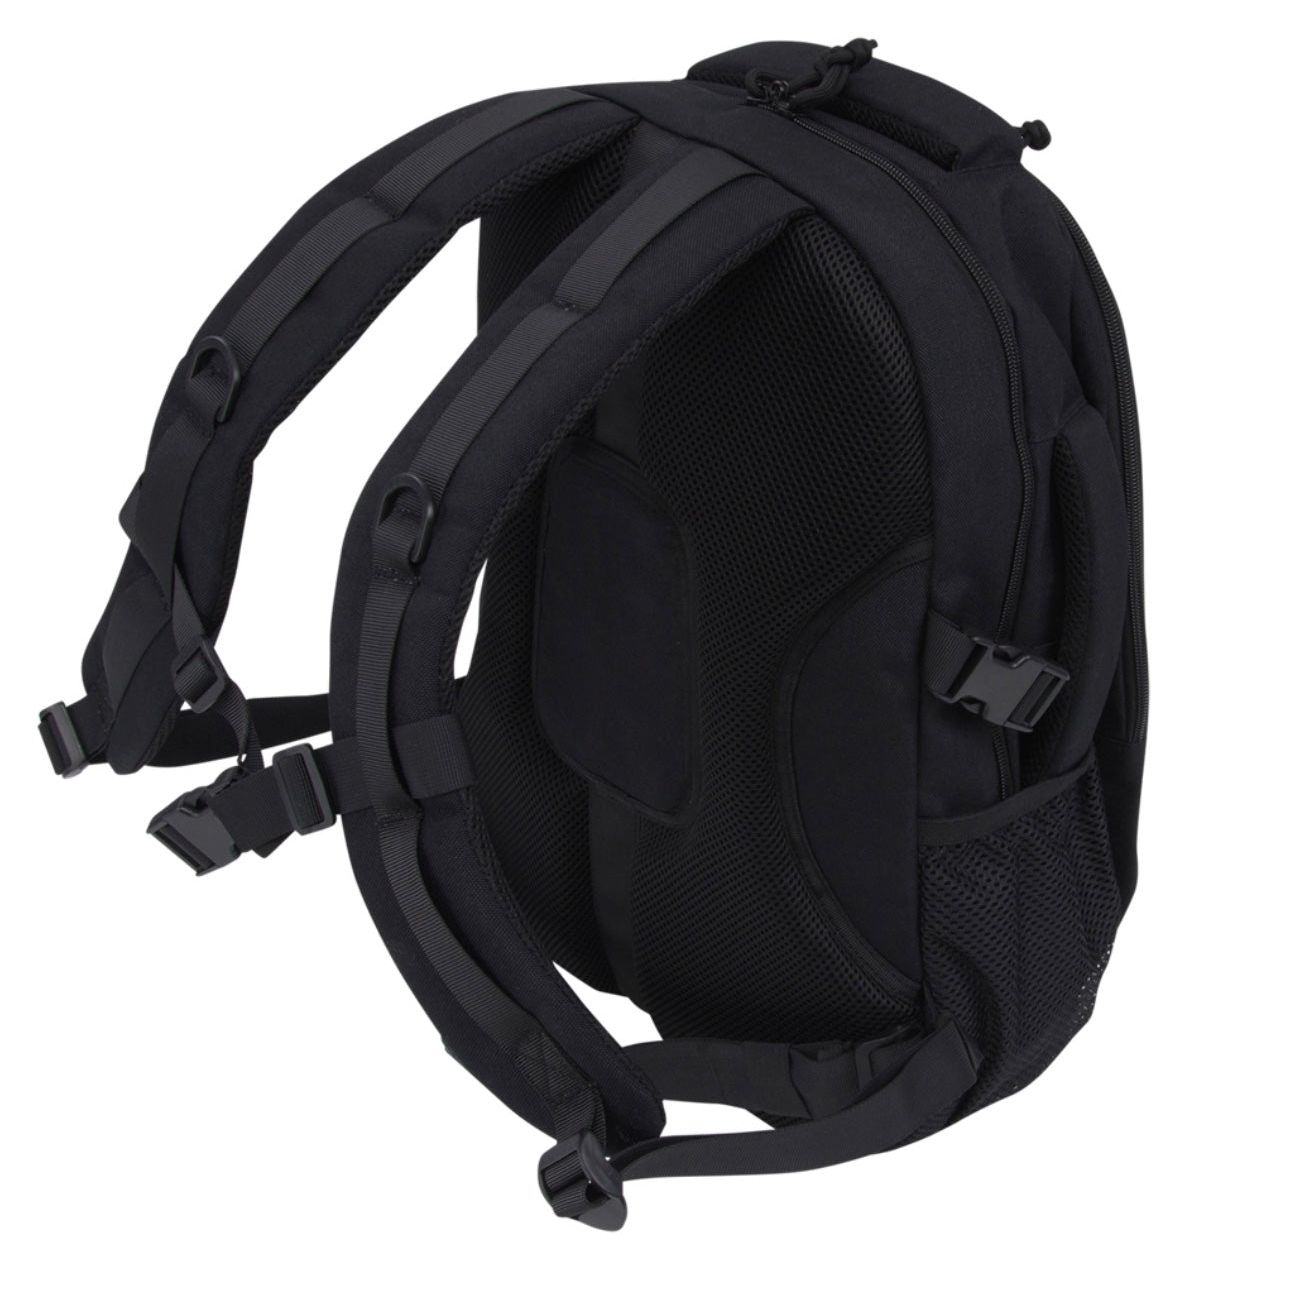 Stab protection backpack CEST®Antiknife